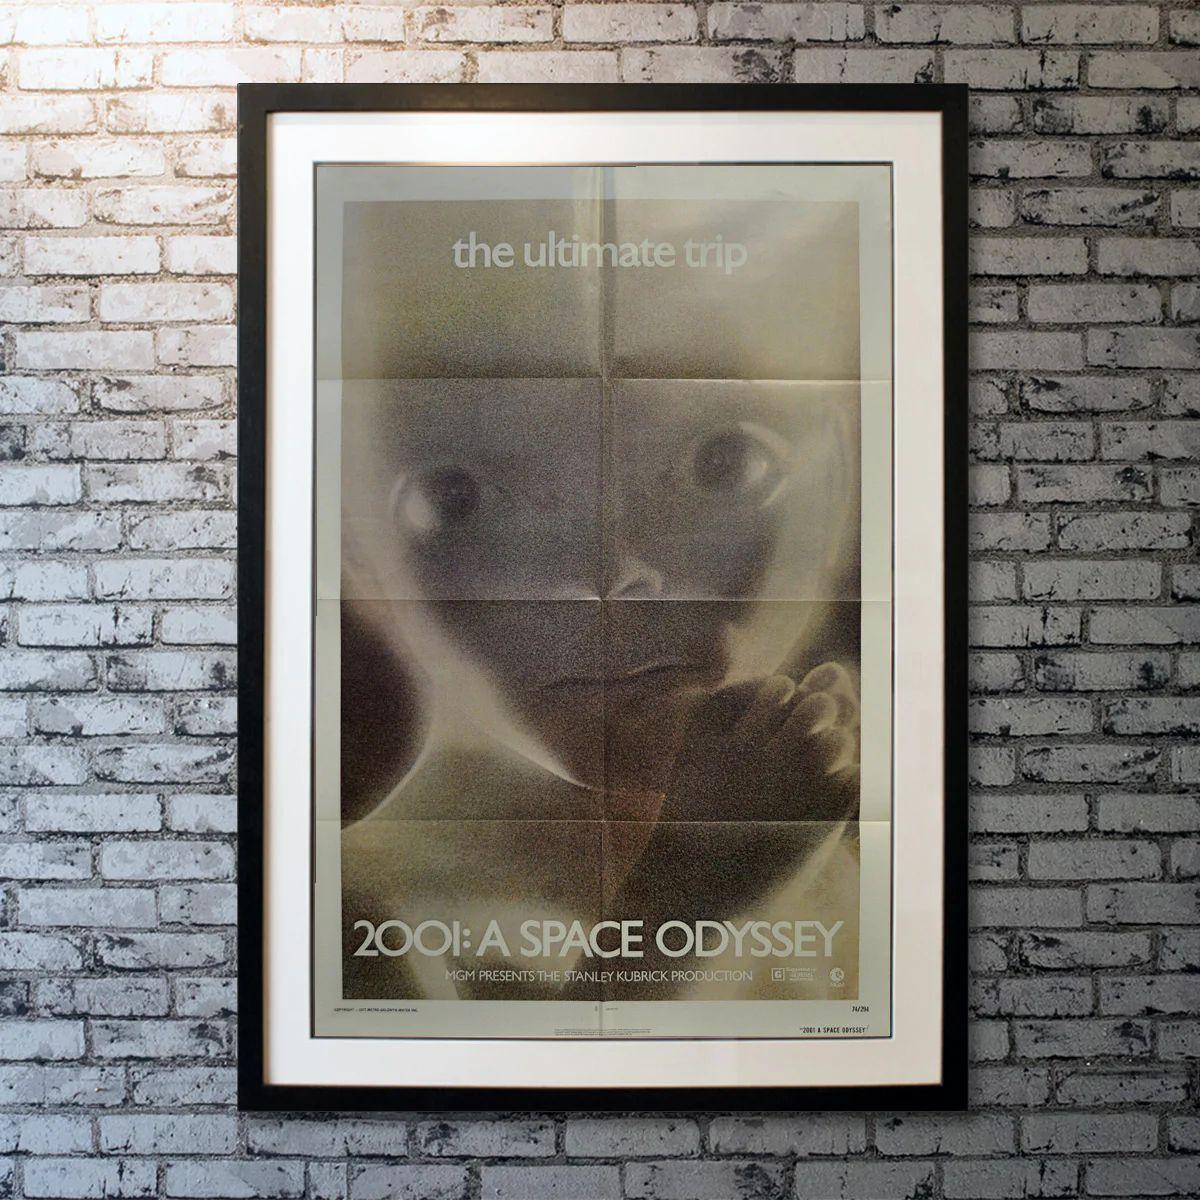 2001: A Space Odyssey, Unframed Poster, 1974r

After uncovering a mysterious artifact buried beneath the Lunar surface, a spacecraft is sent to Jupiter to find its origins - a spacecraft manned by two men and the supercomputer H.A.L. 9000.

Year: